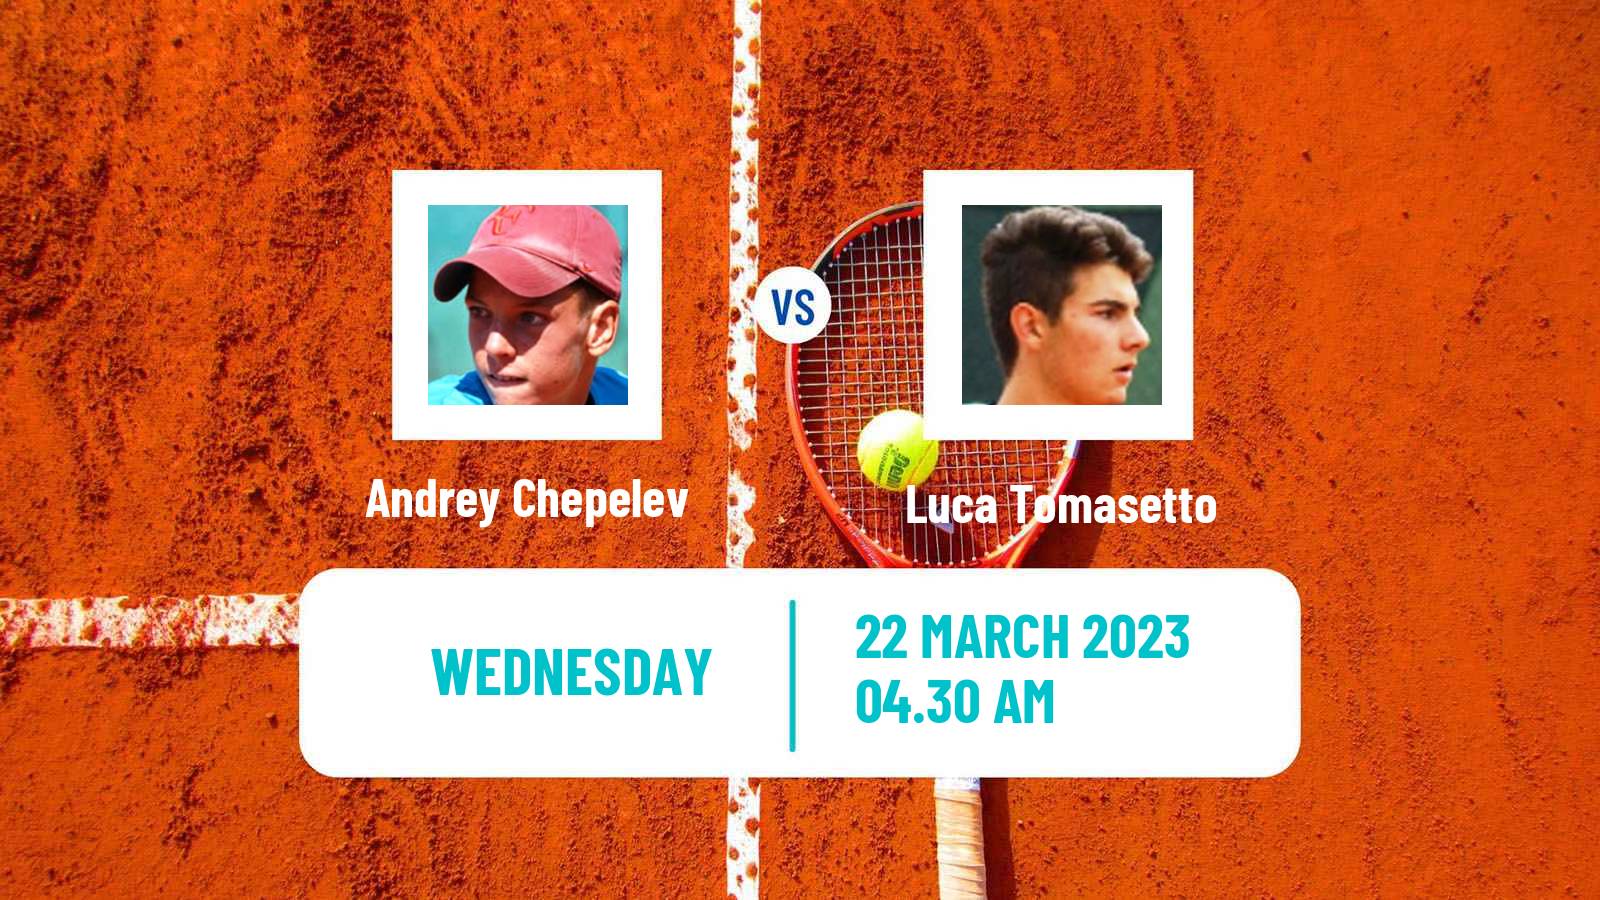 Tennis ITF Tournaments Andrey Chepelev - Luca Tomasetto